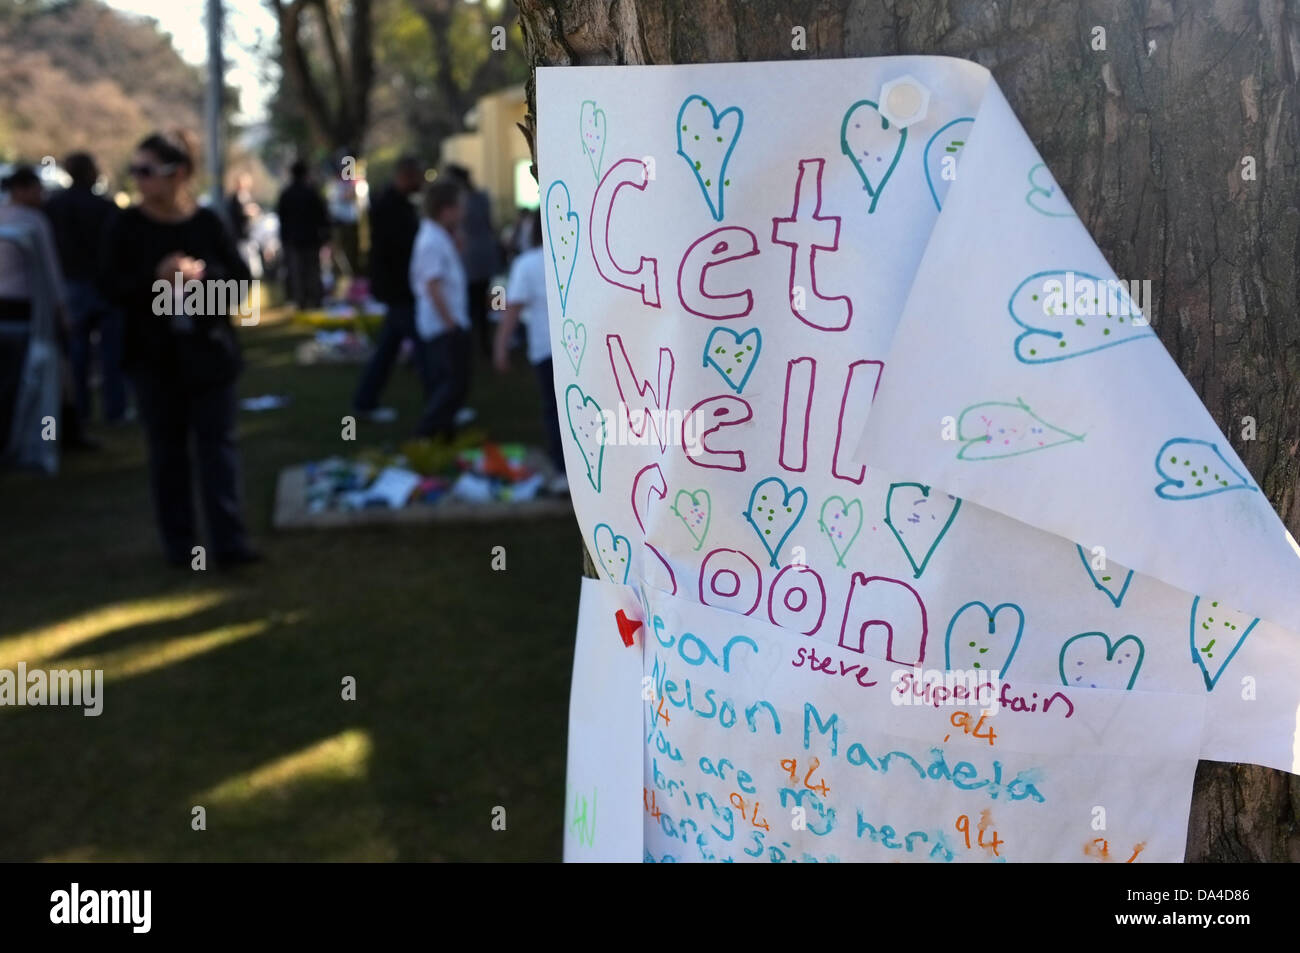 Johannesburg, South Africa. 03rd July, 2013. Members of the public gather outside Nelson Mandela's house in Houghton, Johannesburg. People are leaving well-wishes for the former South African President who is in a Pretoria hospital with a reoccurring Lung condition. Stock Photo